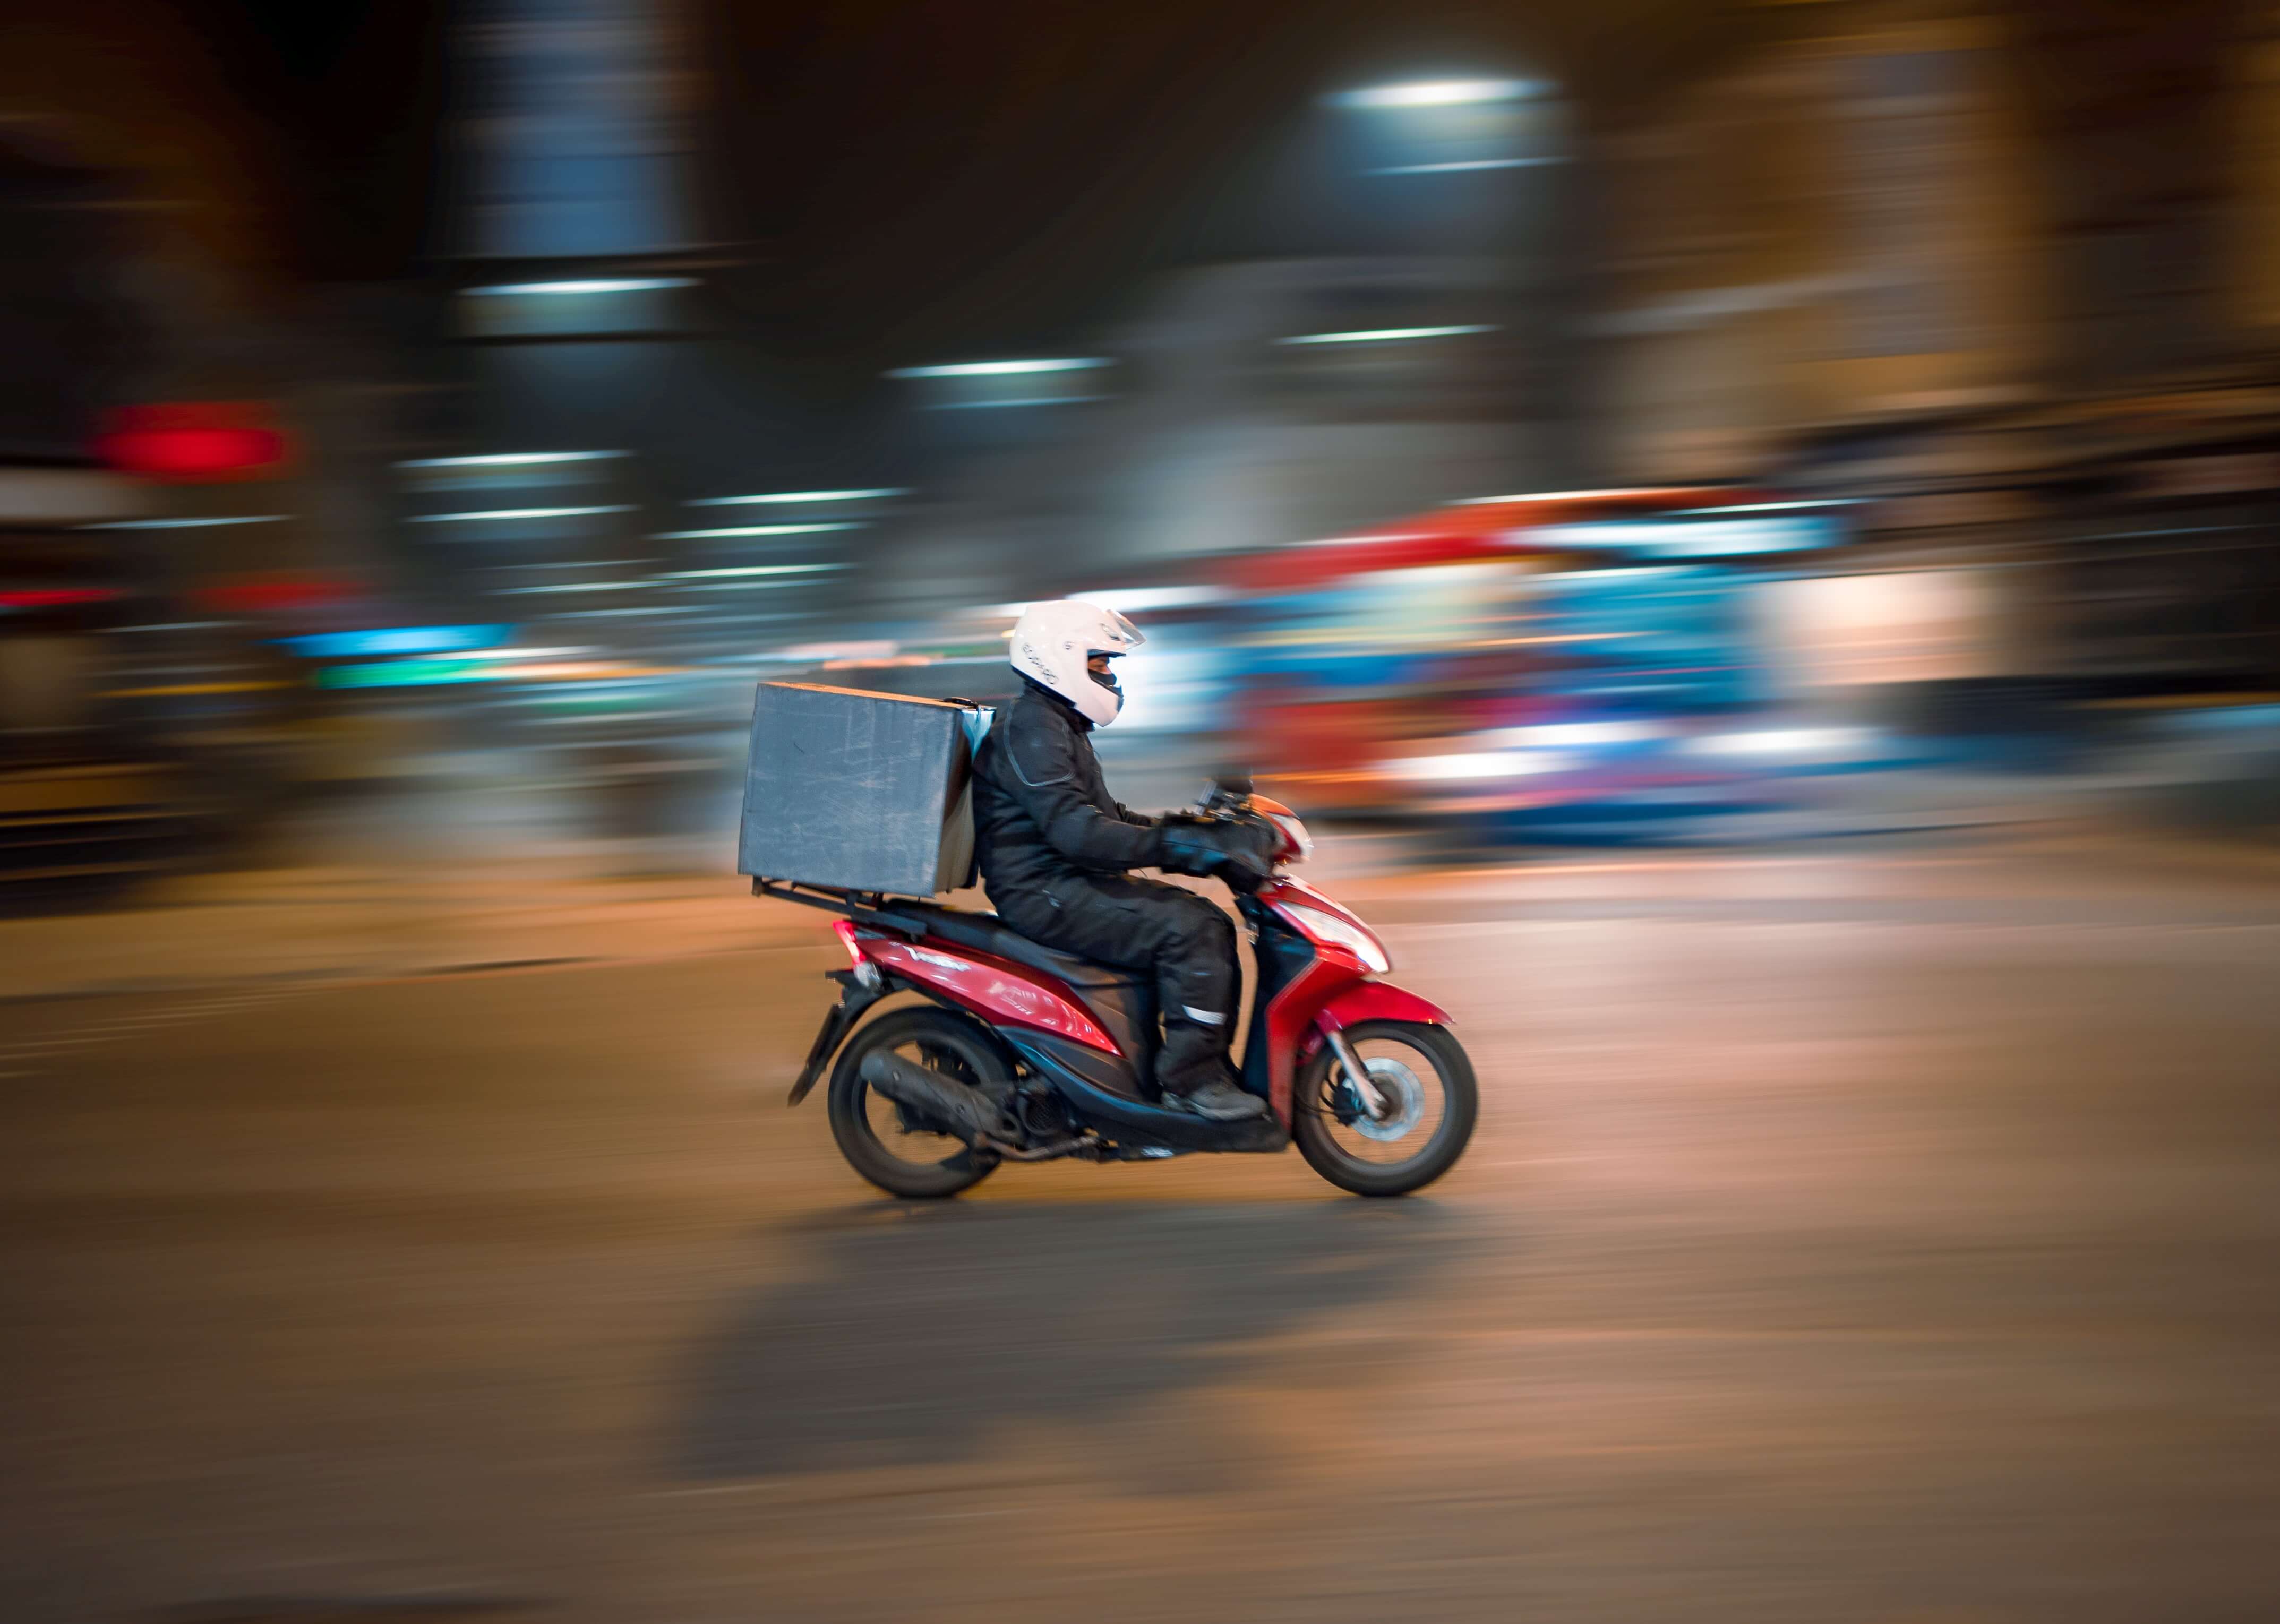 A delivery driver drives a moped while the background whizzes by